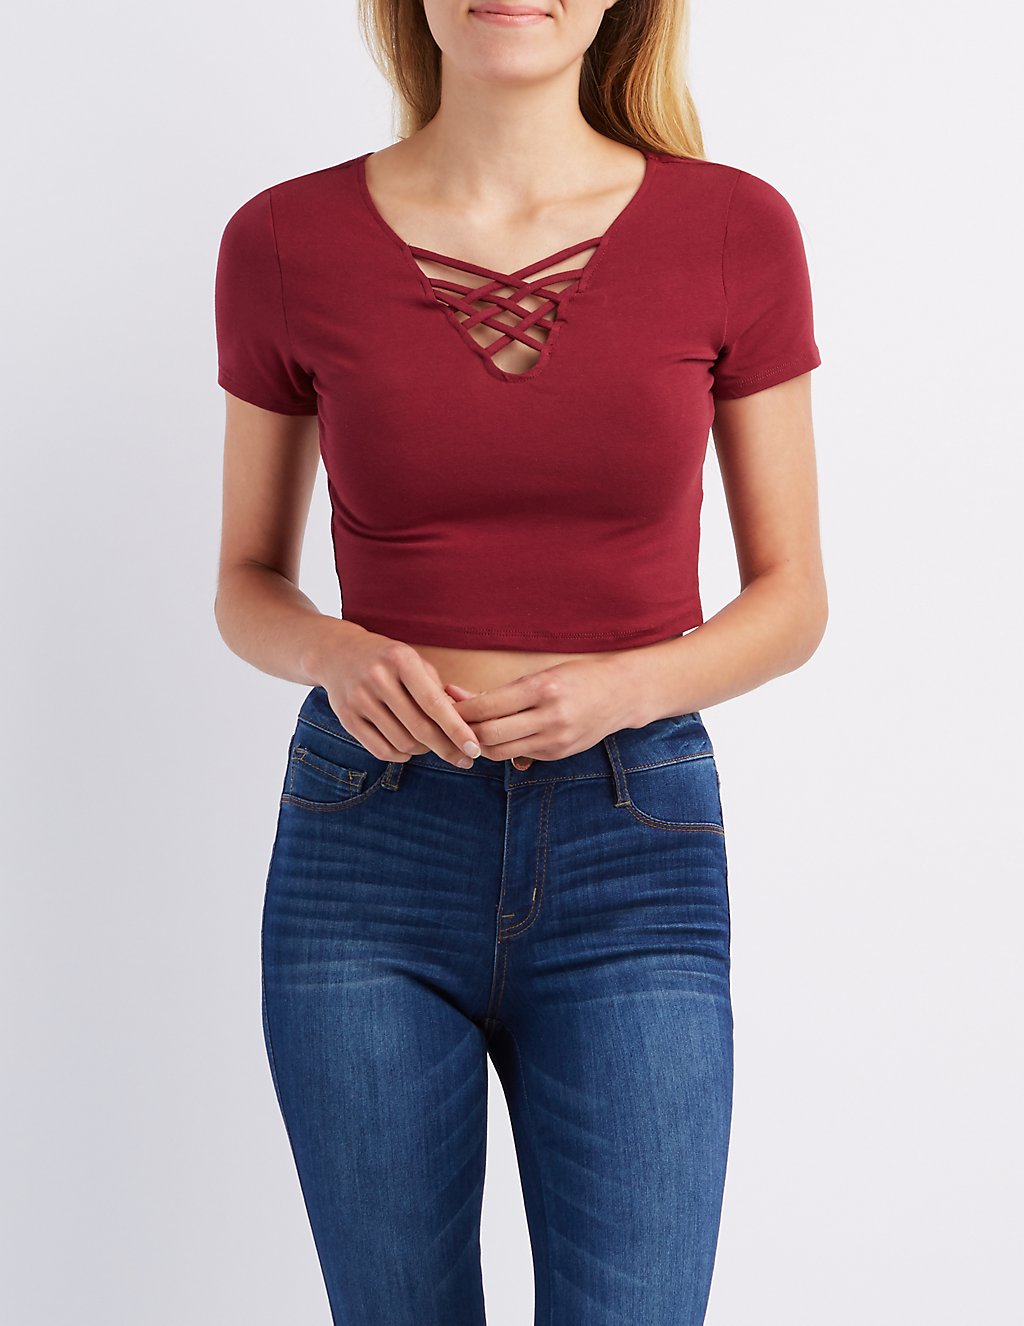 Charlotte Russe Caged Crop Top